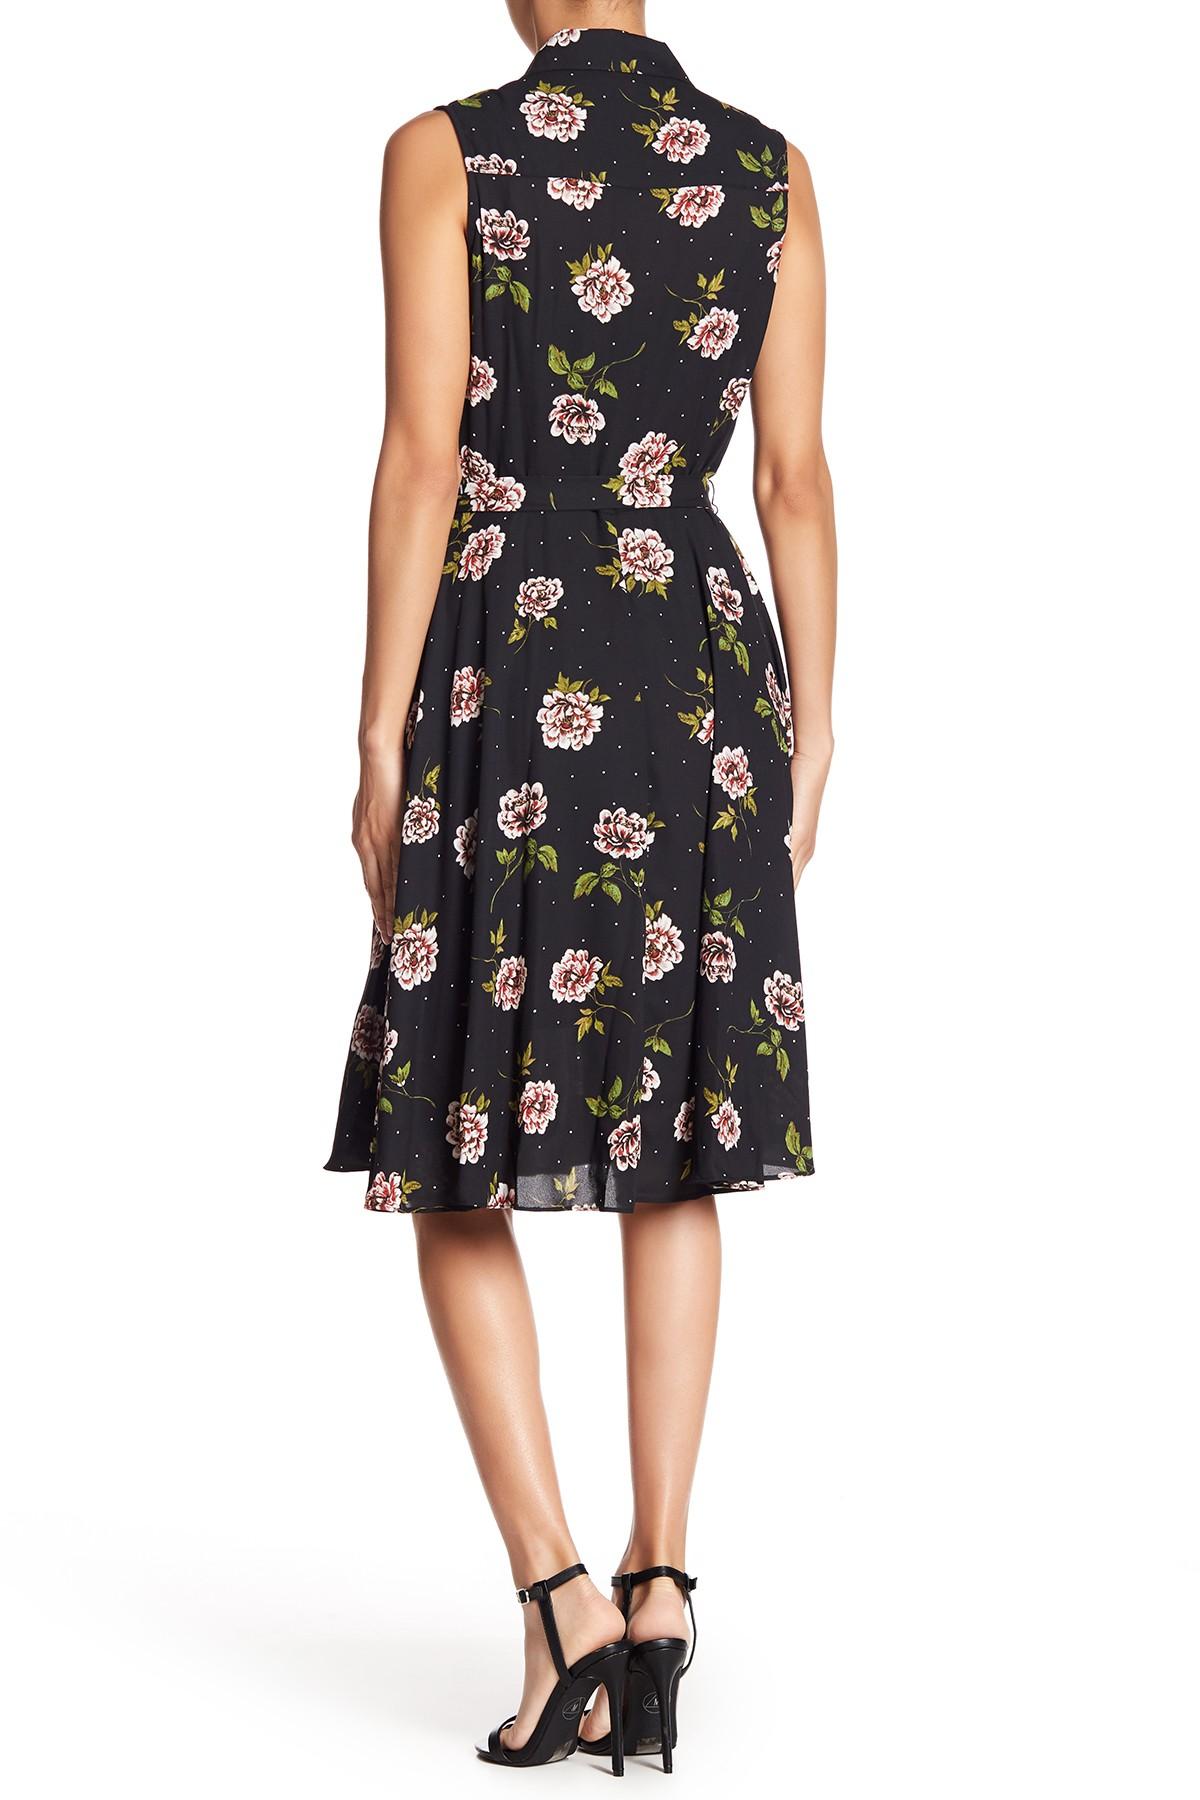 Nanette Lepore Synthetic Pleated Floral Print Dress in Black - Lyst